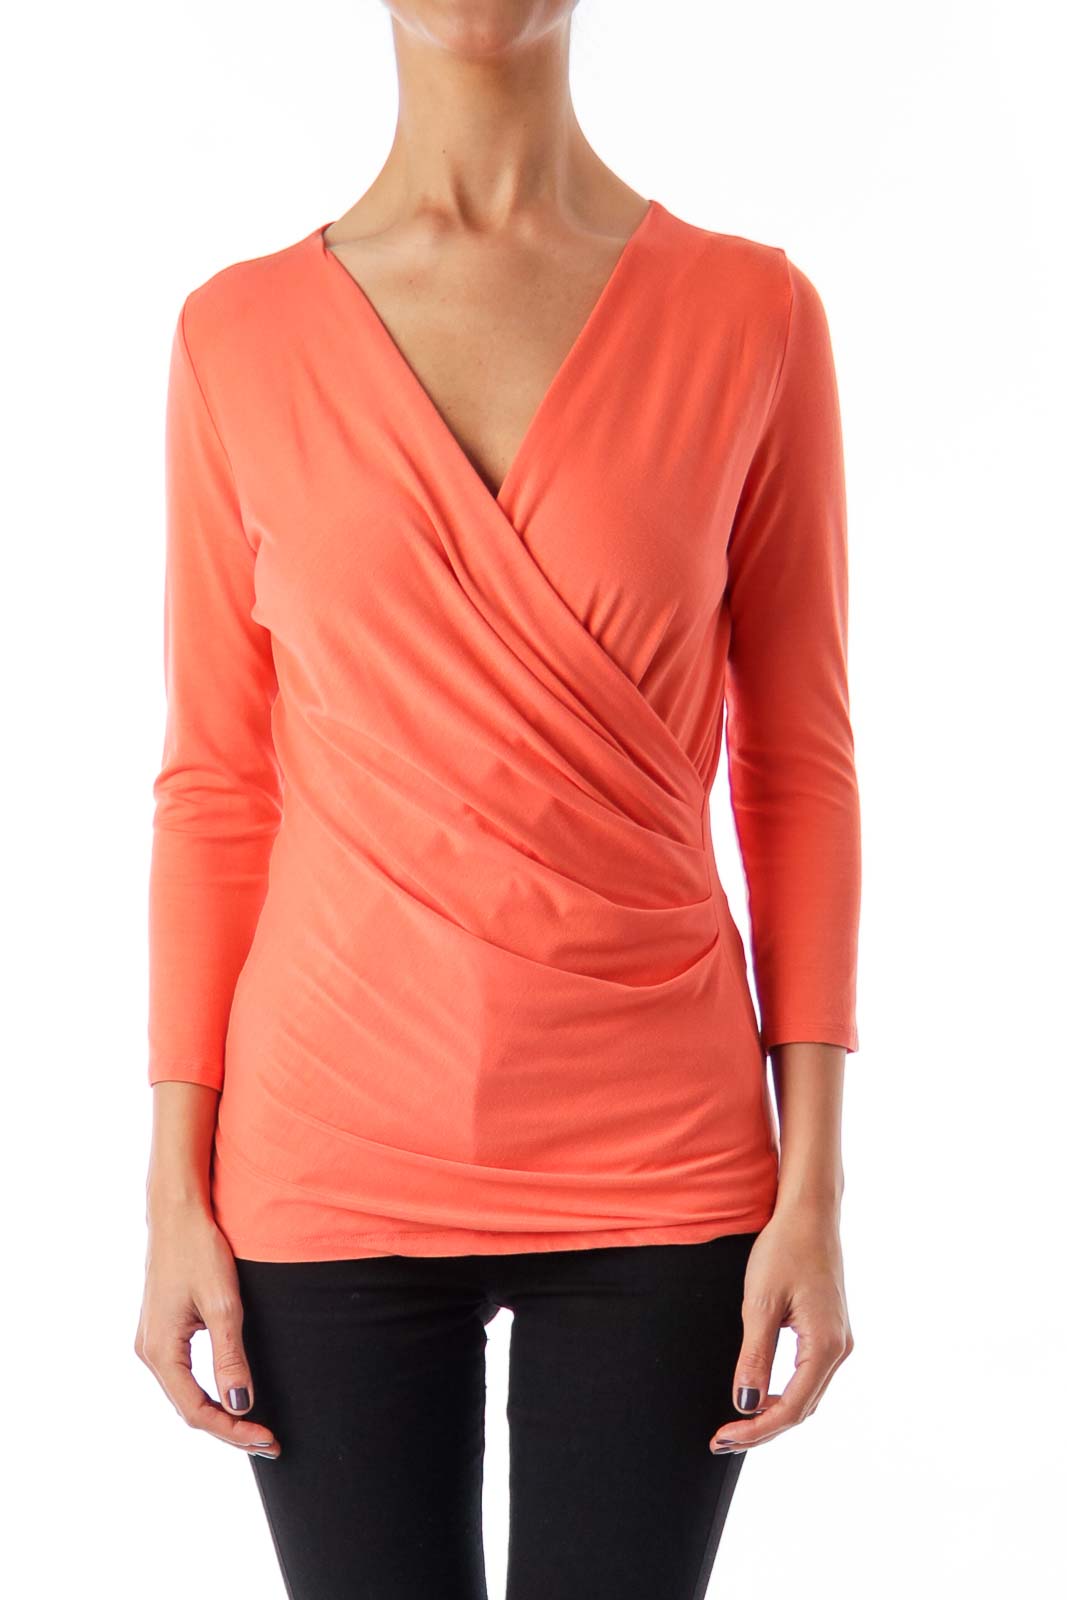 Peach V-neck 'Caprice' Top Front